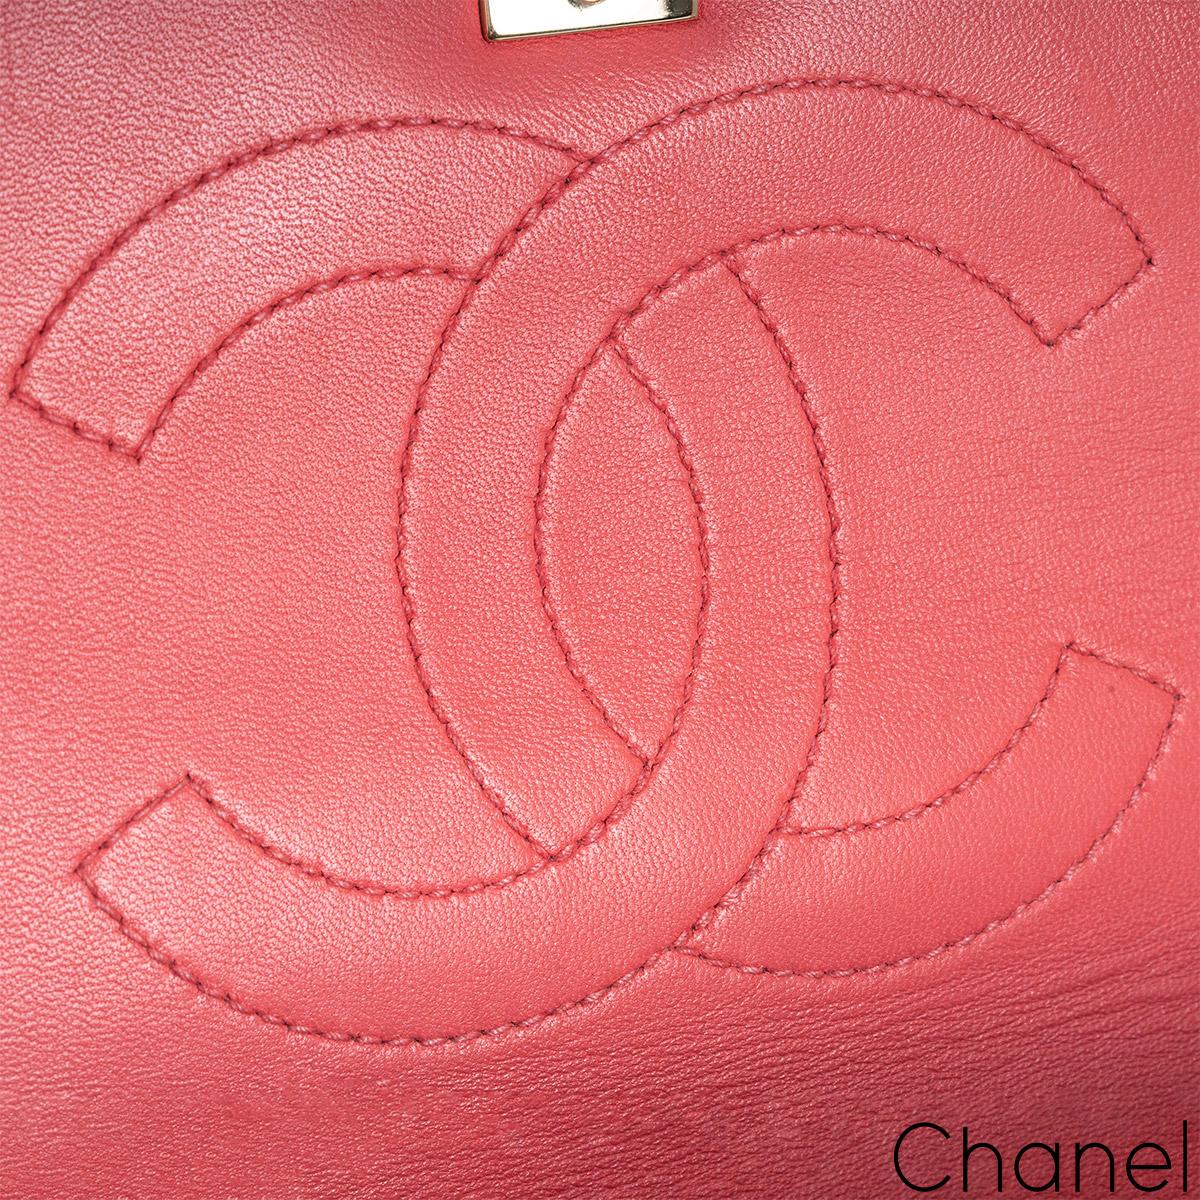 Chanel Small Pink Trendy CC Flap Bag In Excellent Condition For Sale In London, GB